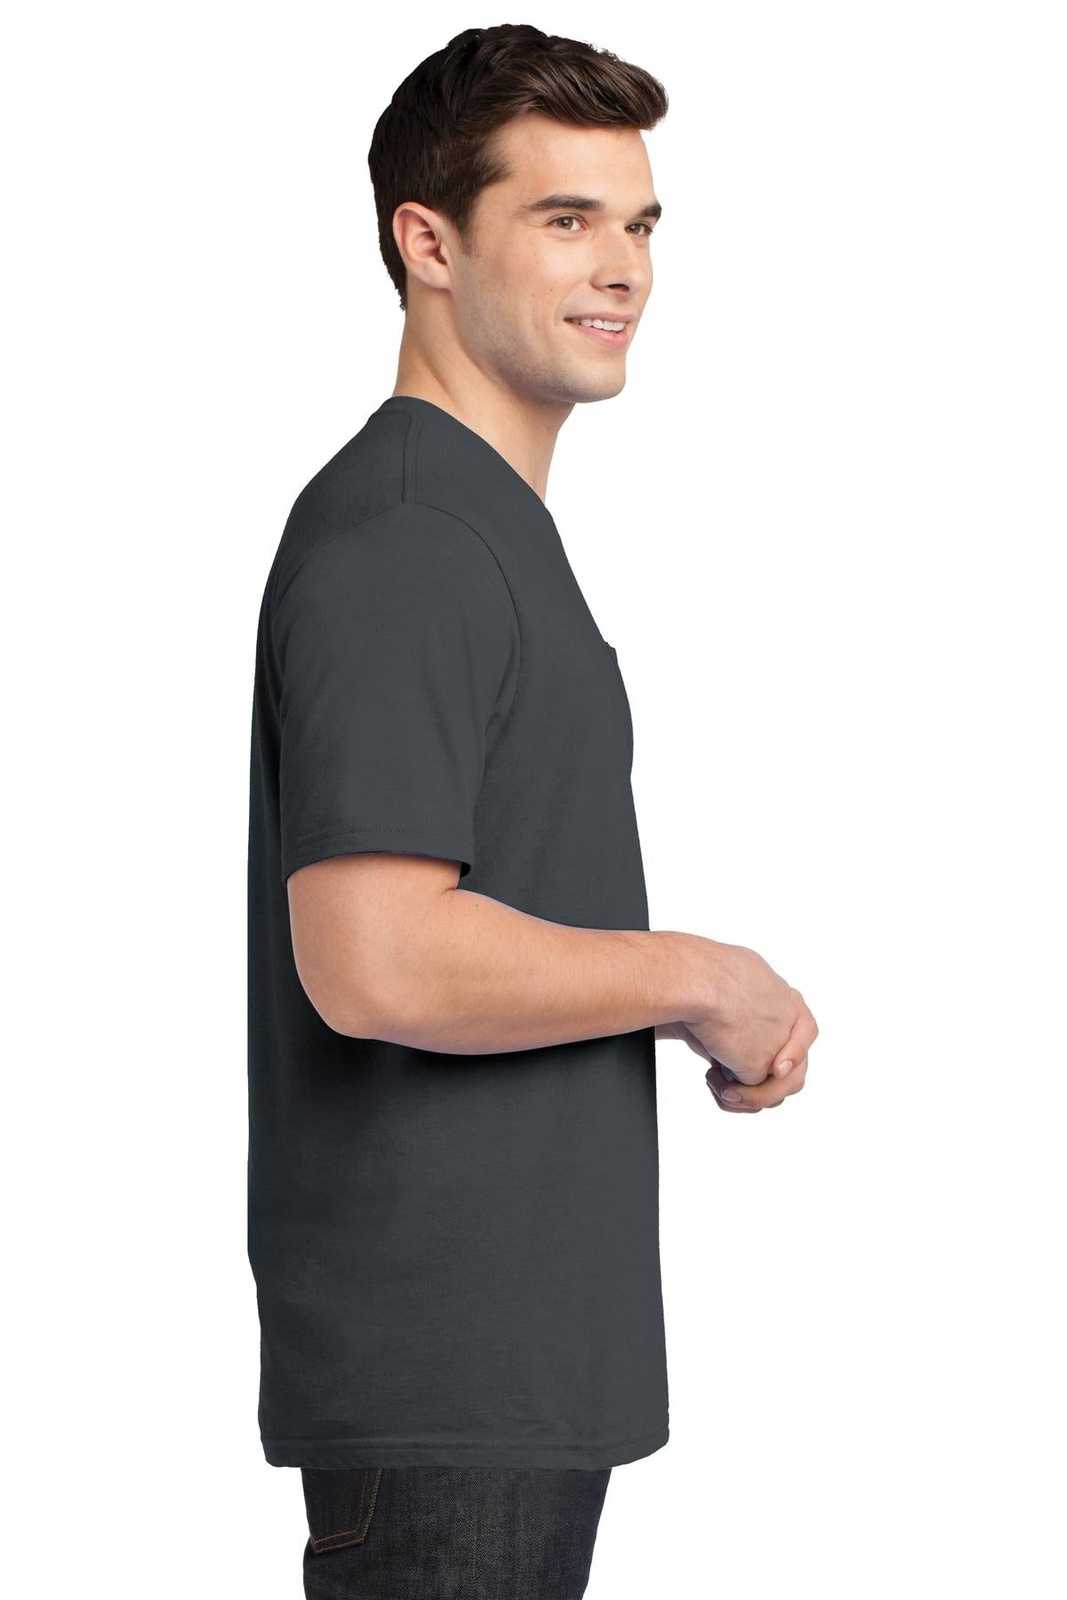 District DT6000P Very Important Tee with Pocket - Charcoal - HIT a Double - 3